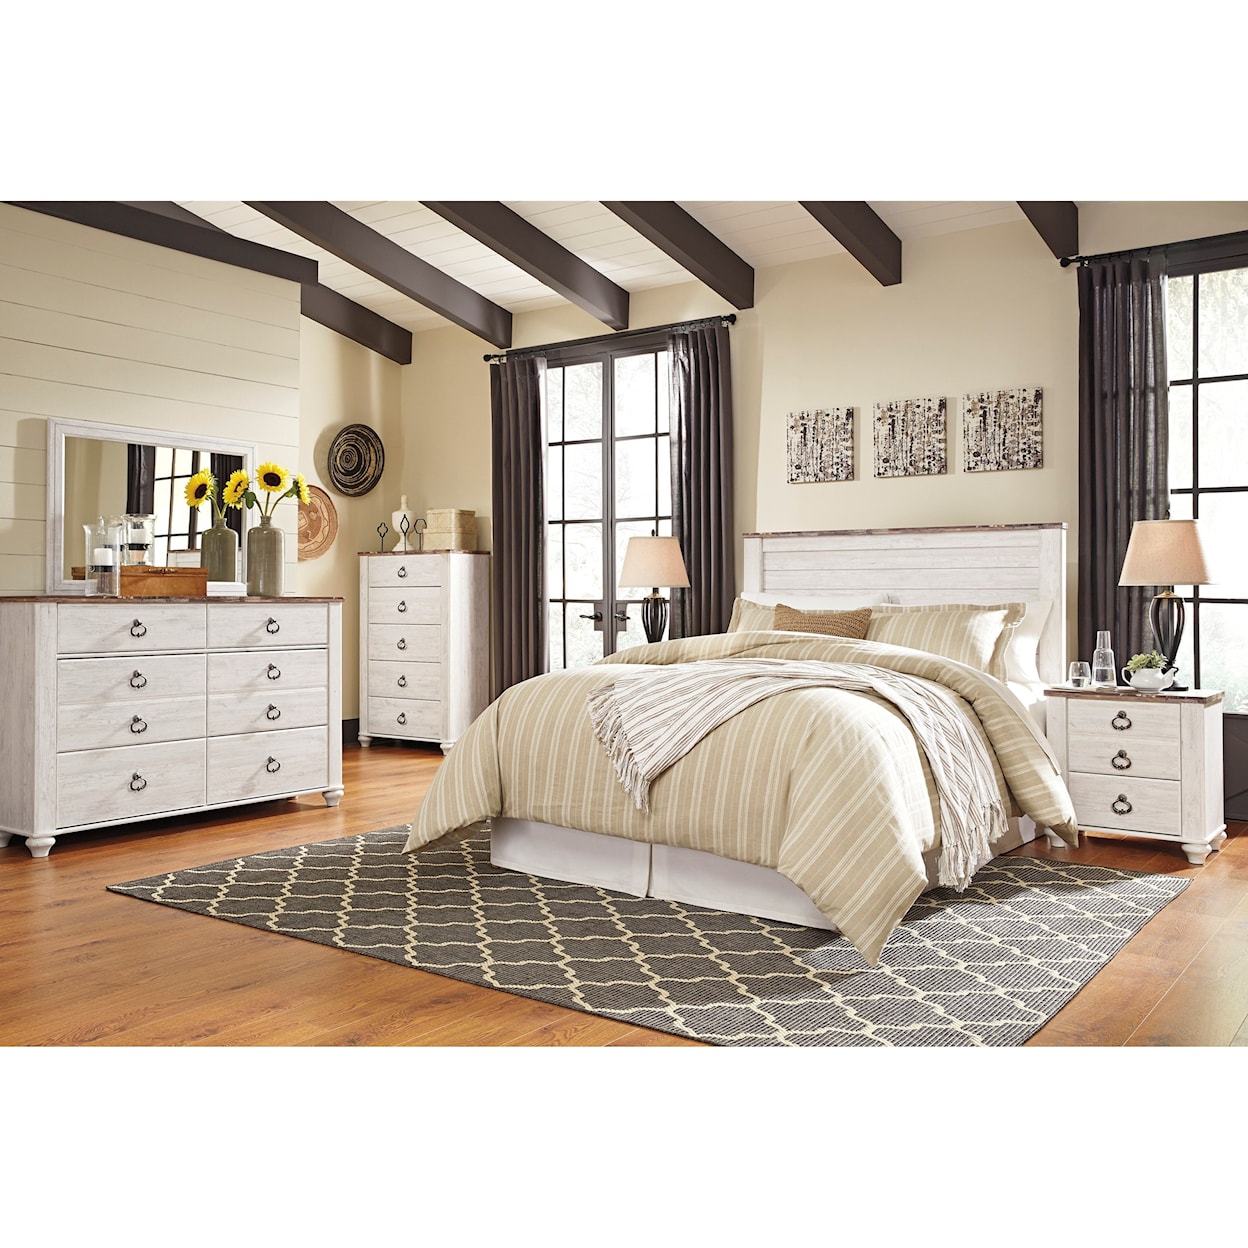 Benchcraft Willowton Queen/Full Bedroom Group